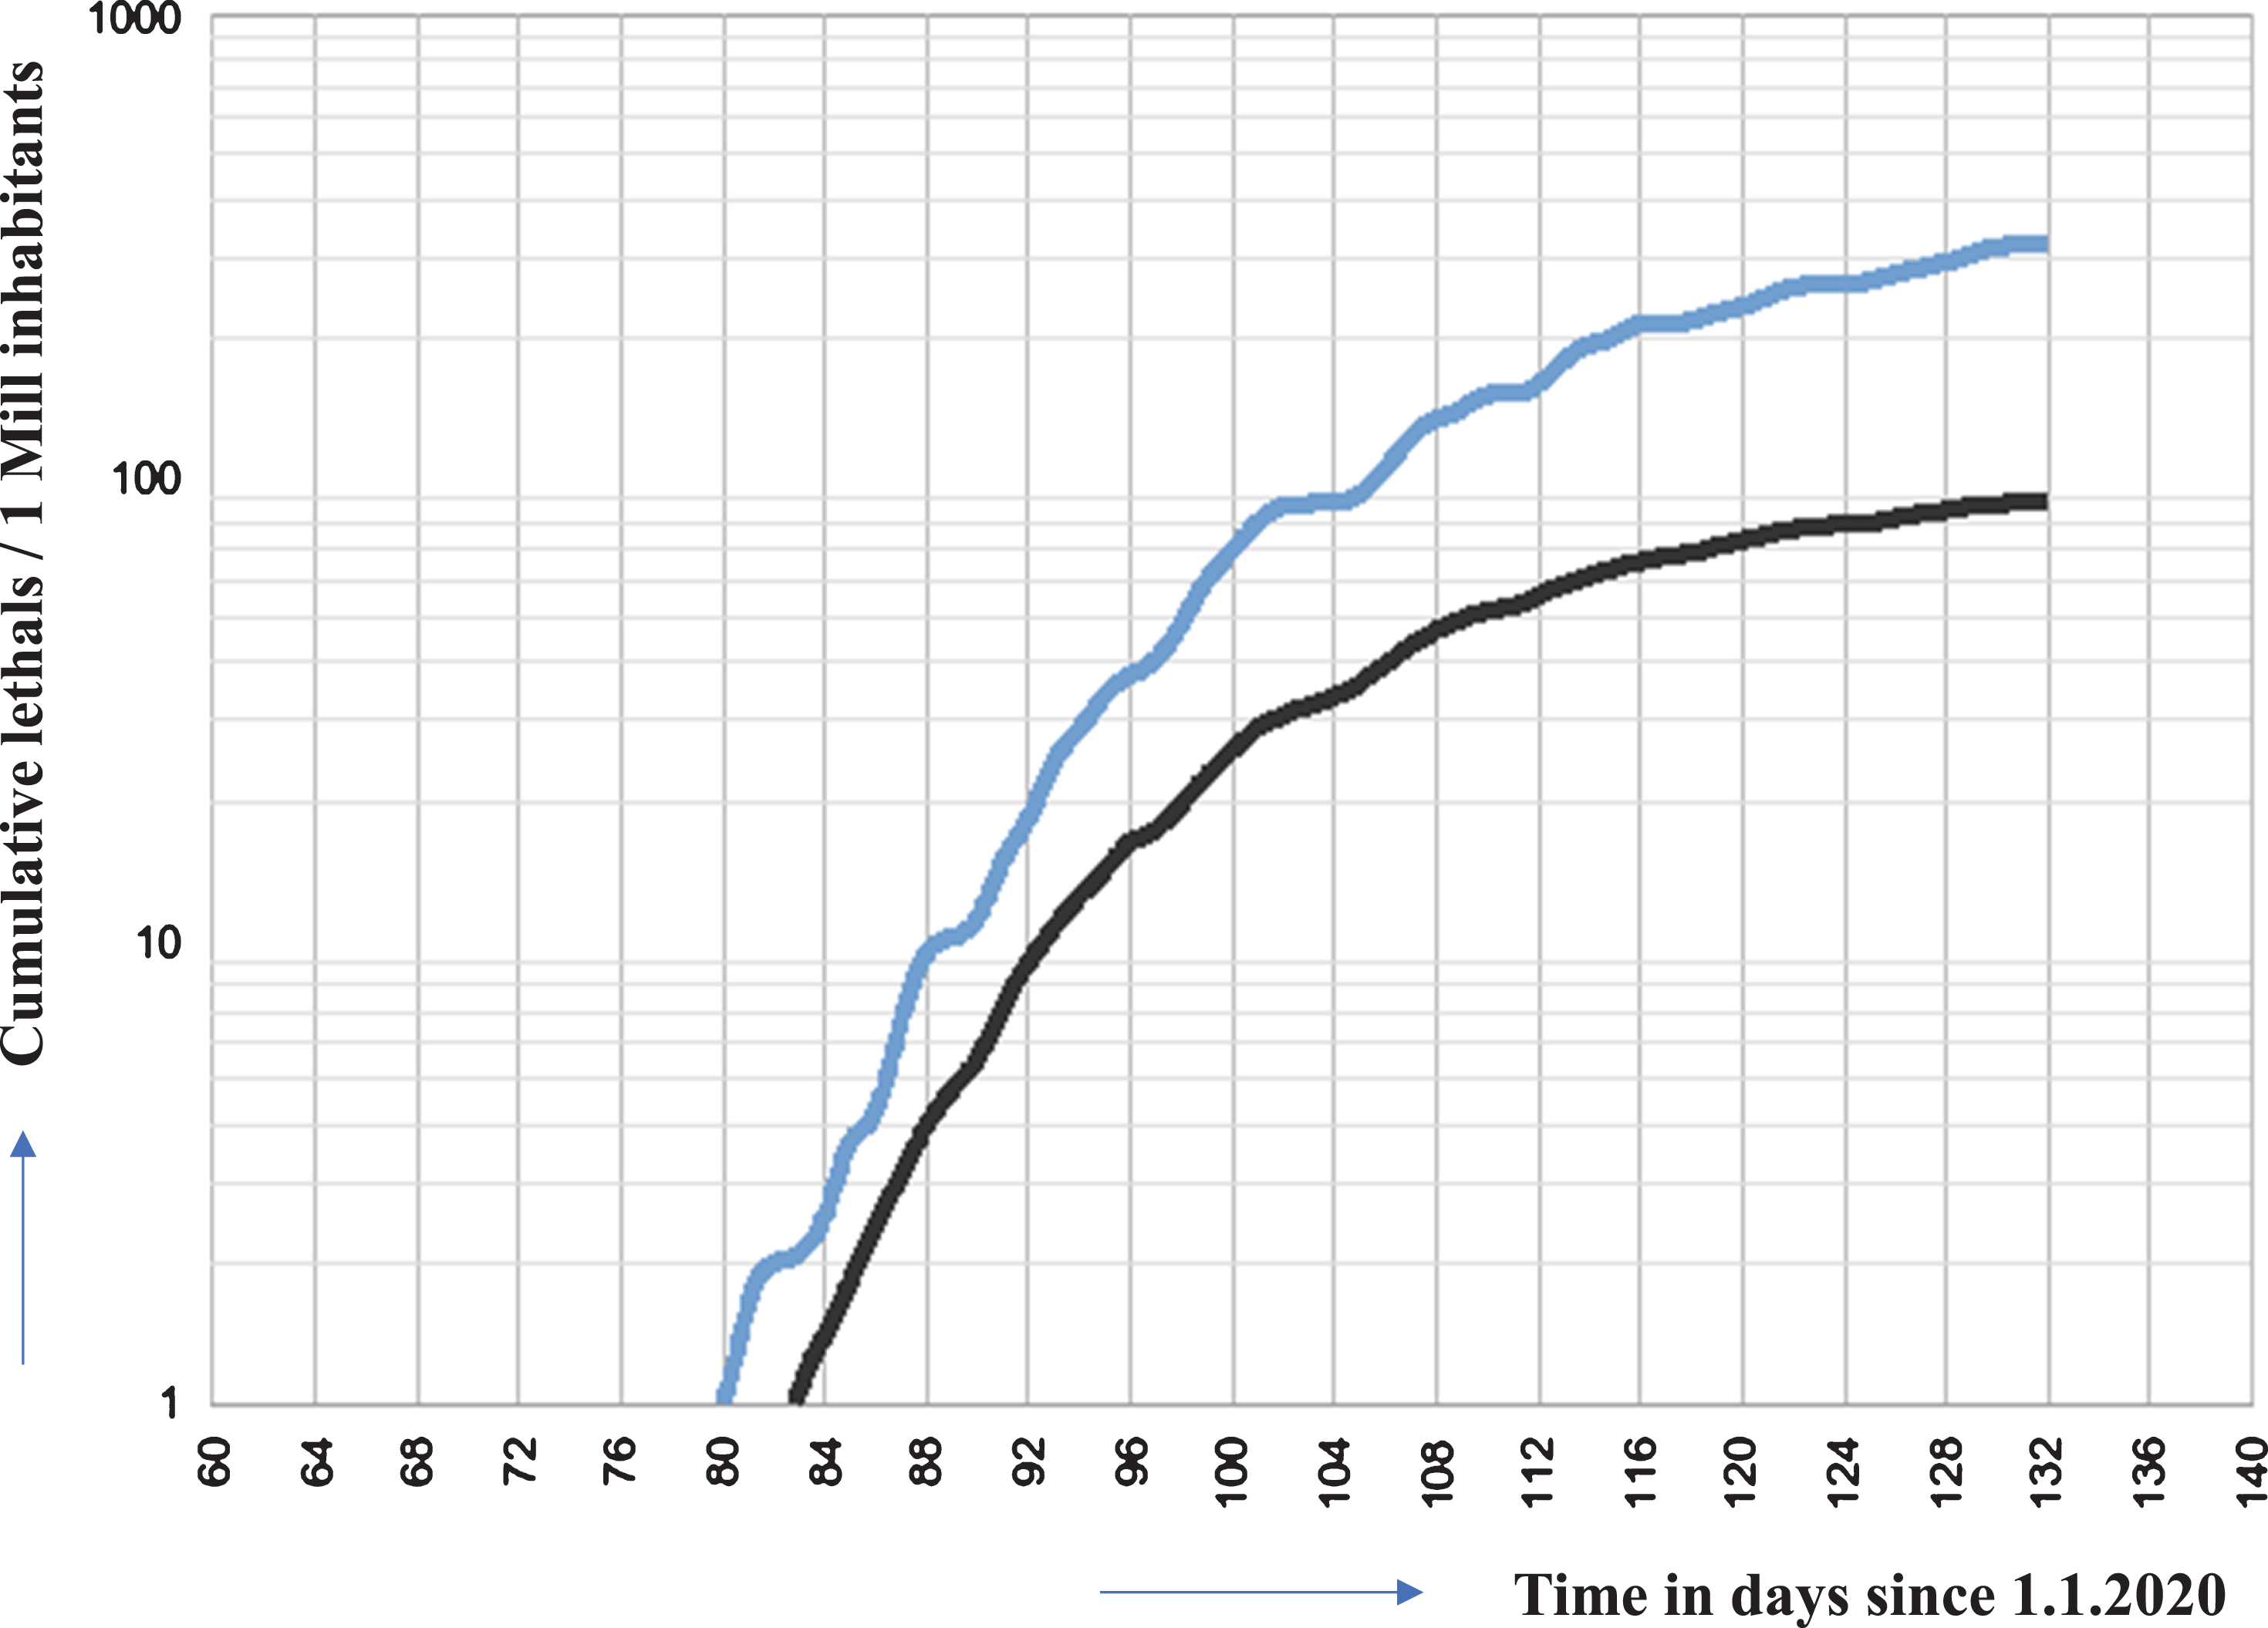 Cumulative deaths of SARS COV-2 infected patients in Germany, Sweden (blue line), Germany (black line) and Taiwan (until day 134 (2020/05/13) 6 cases. Cannot be shown in this representation. Data points lie almost on the x-axis). Data were obtained from the following source: ECDC (https://www.ecdc.europa.eu/en/publications-data/download-todays-data-geographic-distribution-covid-19-cases-worldwide). The data obtained from the above listed sources is put in to a context described herein with. Our policy regarding the information format is prioritizing Open Source and Free Software. We therefore make all data retrieved and analyzed hereby available at corona.milliways.online.